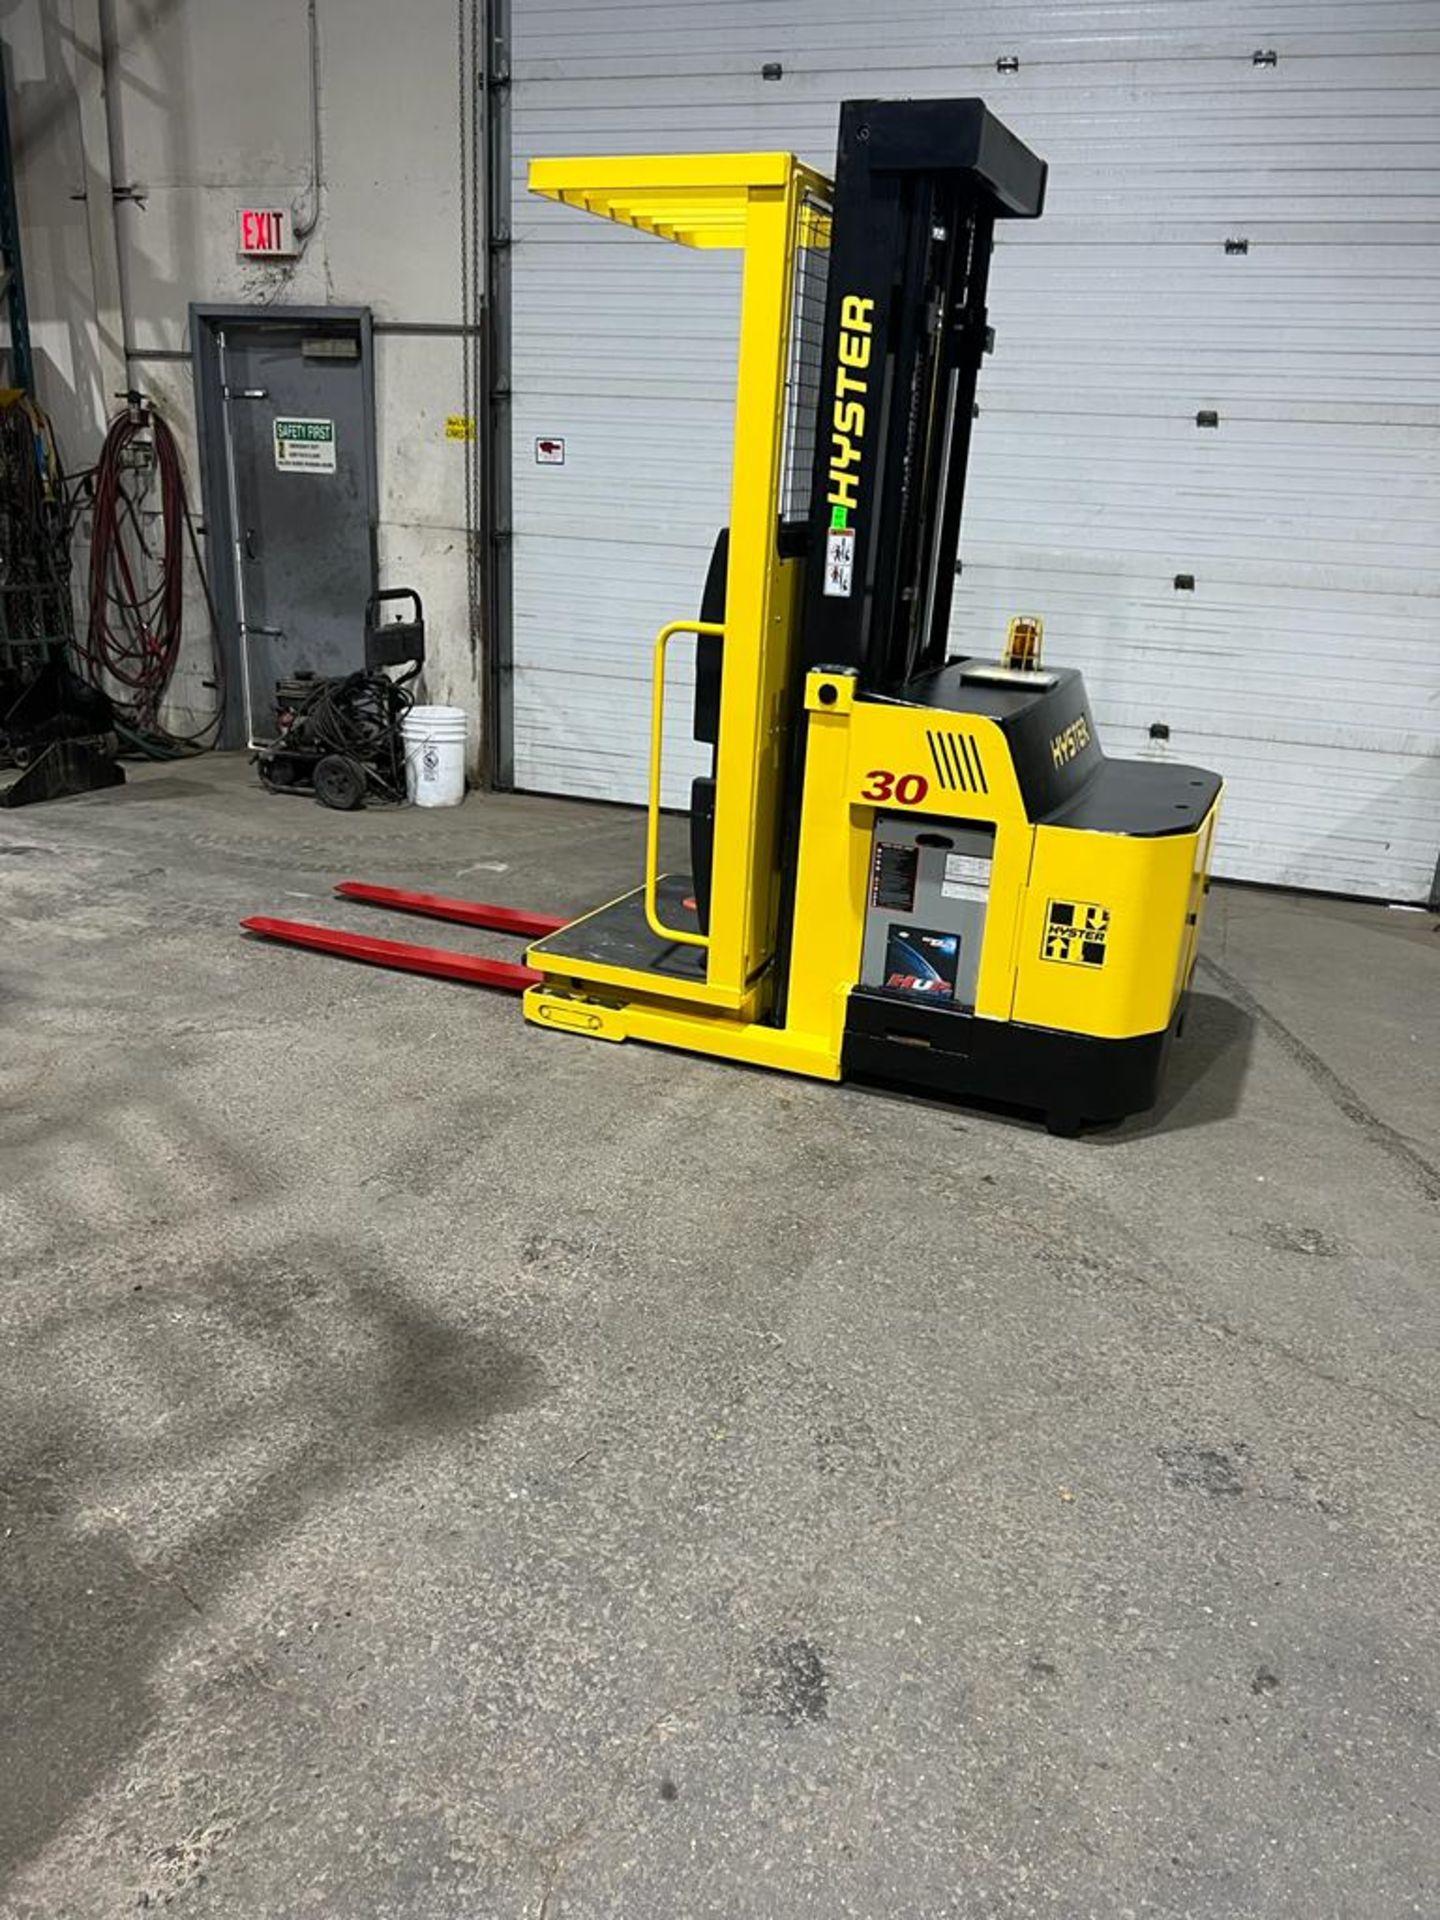 2015 Hyster Order Picker 3000lbs capacity electric Powered Pallet Cart 24V battery - FREE CUSTOMS